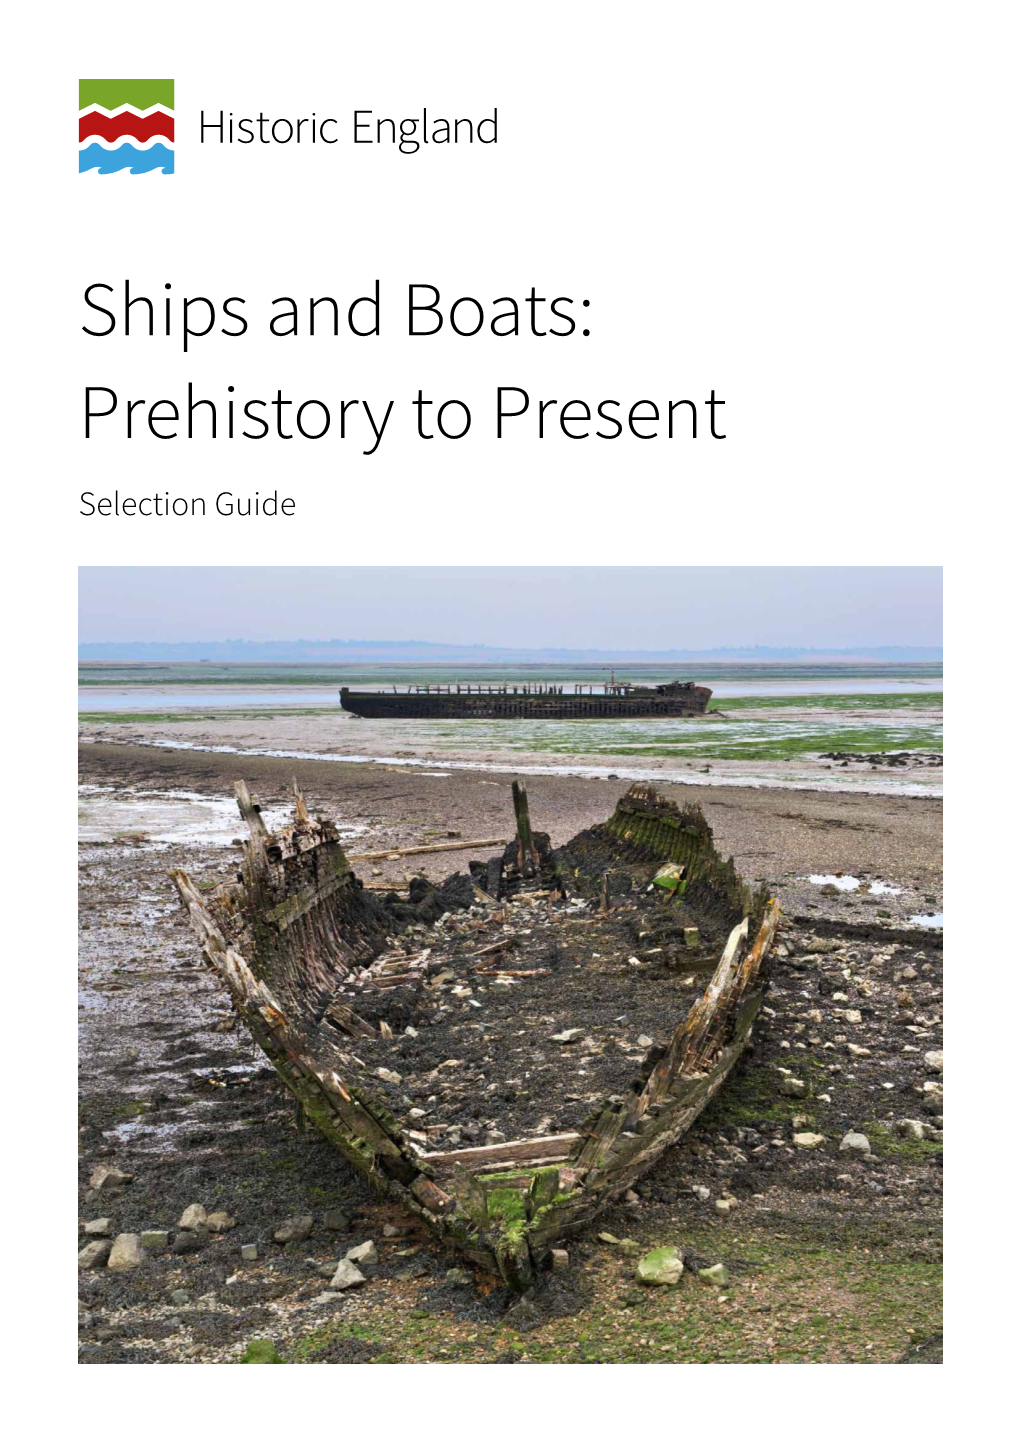 Ships and Boats: Prehistory to Present Selection Guide Summary